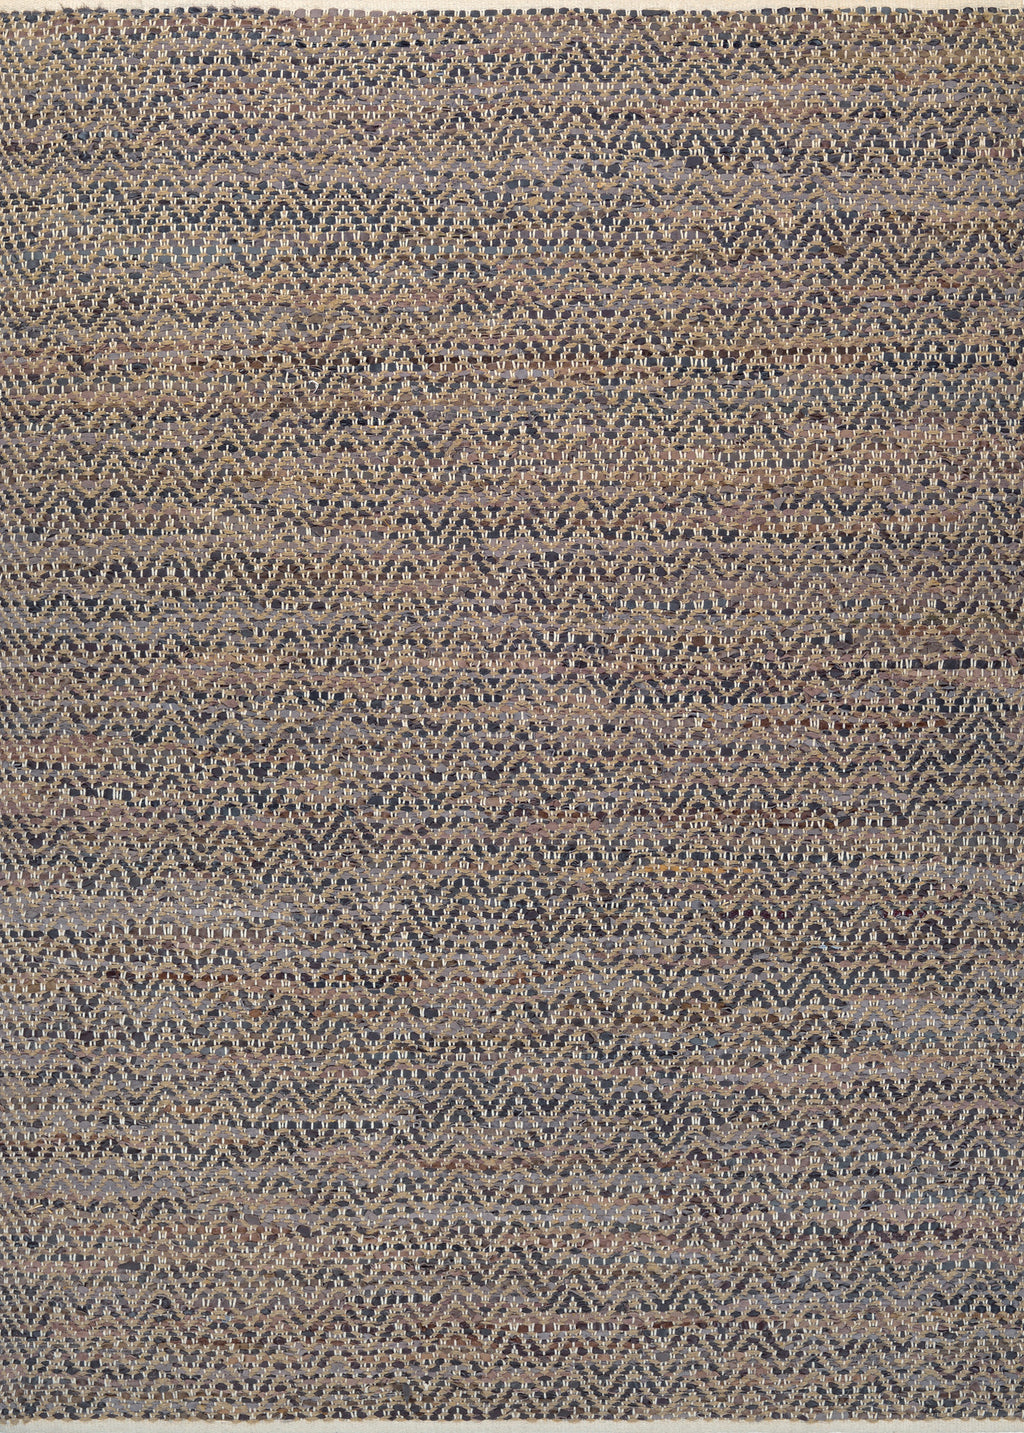 Couristan Nature's Elements Terrain Natural/Brown/Stone Area Rug